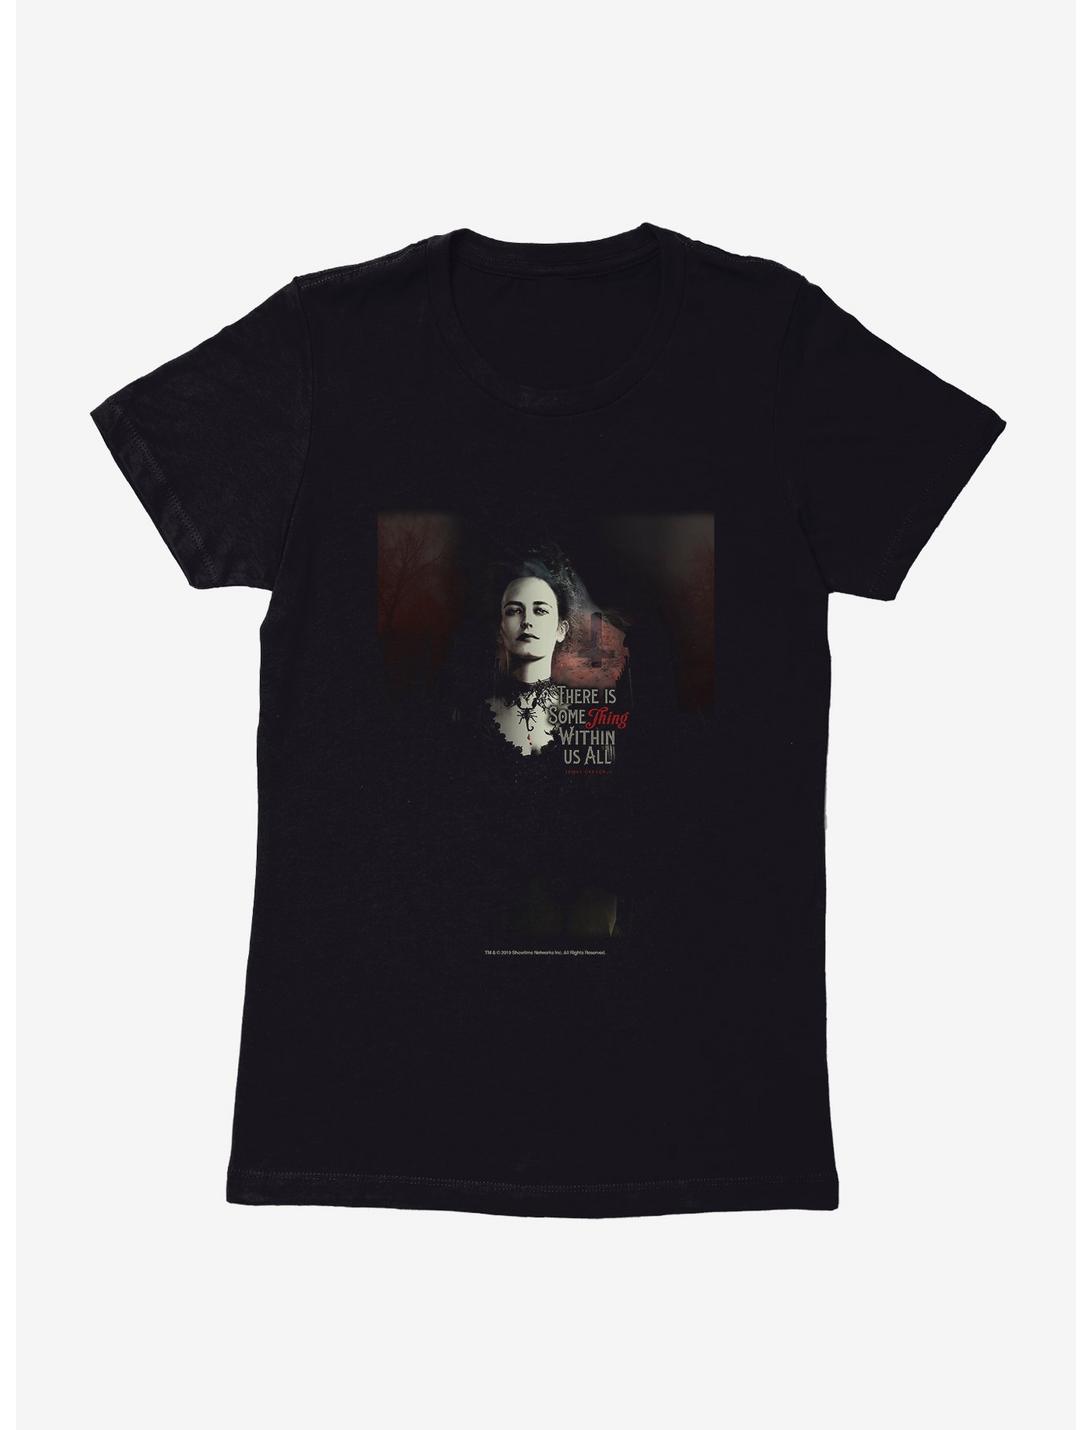 Penny Dreadful Vanessa Ives Within Us Womens T-Shirt, BLACK, hi-res